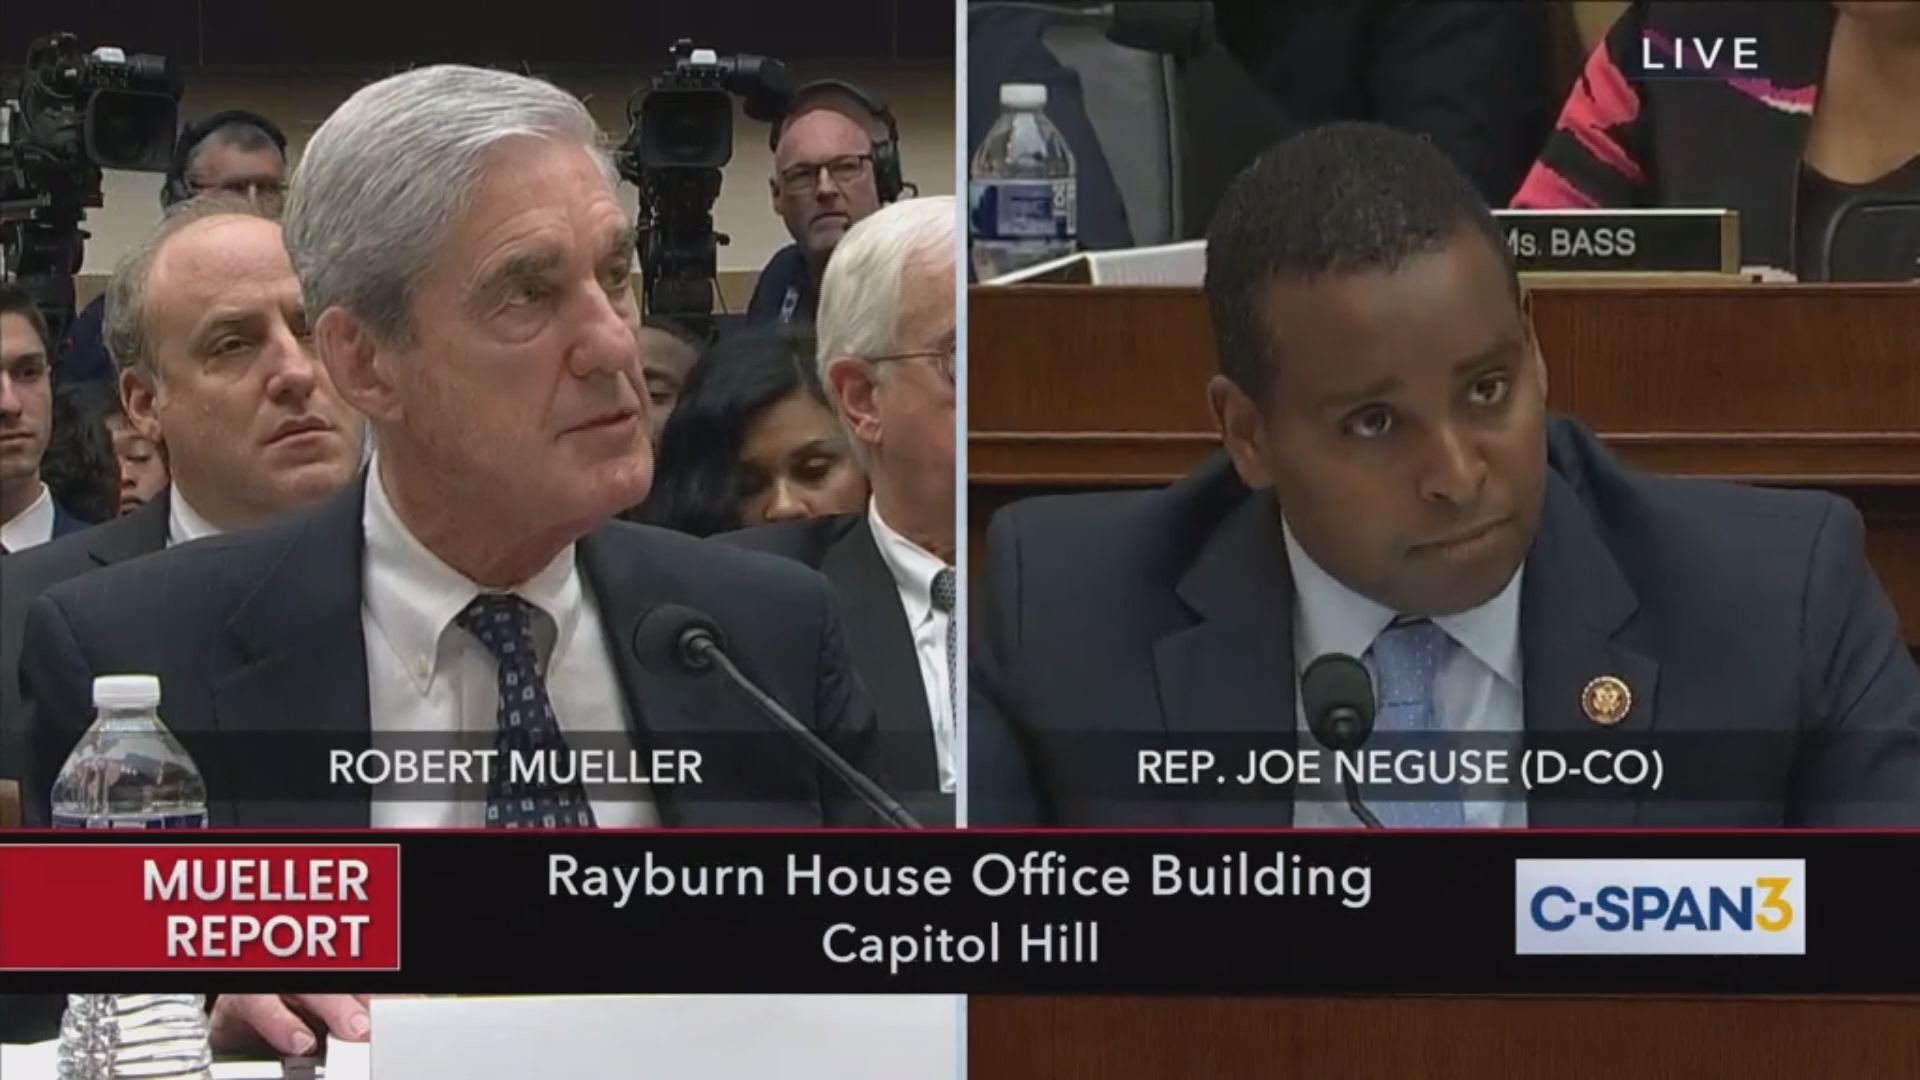 U.S. Rep. Joe Neguse (D-Colo.) questioned former special counsel Robert Mueller during testimony before the House Judiciary Committee on July 24, 2019. Mueller investigated allegations of Russian interference in the 2016 presidential election, as well as whether Pres. Trump's campaign colluded with the Russian government.